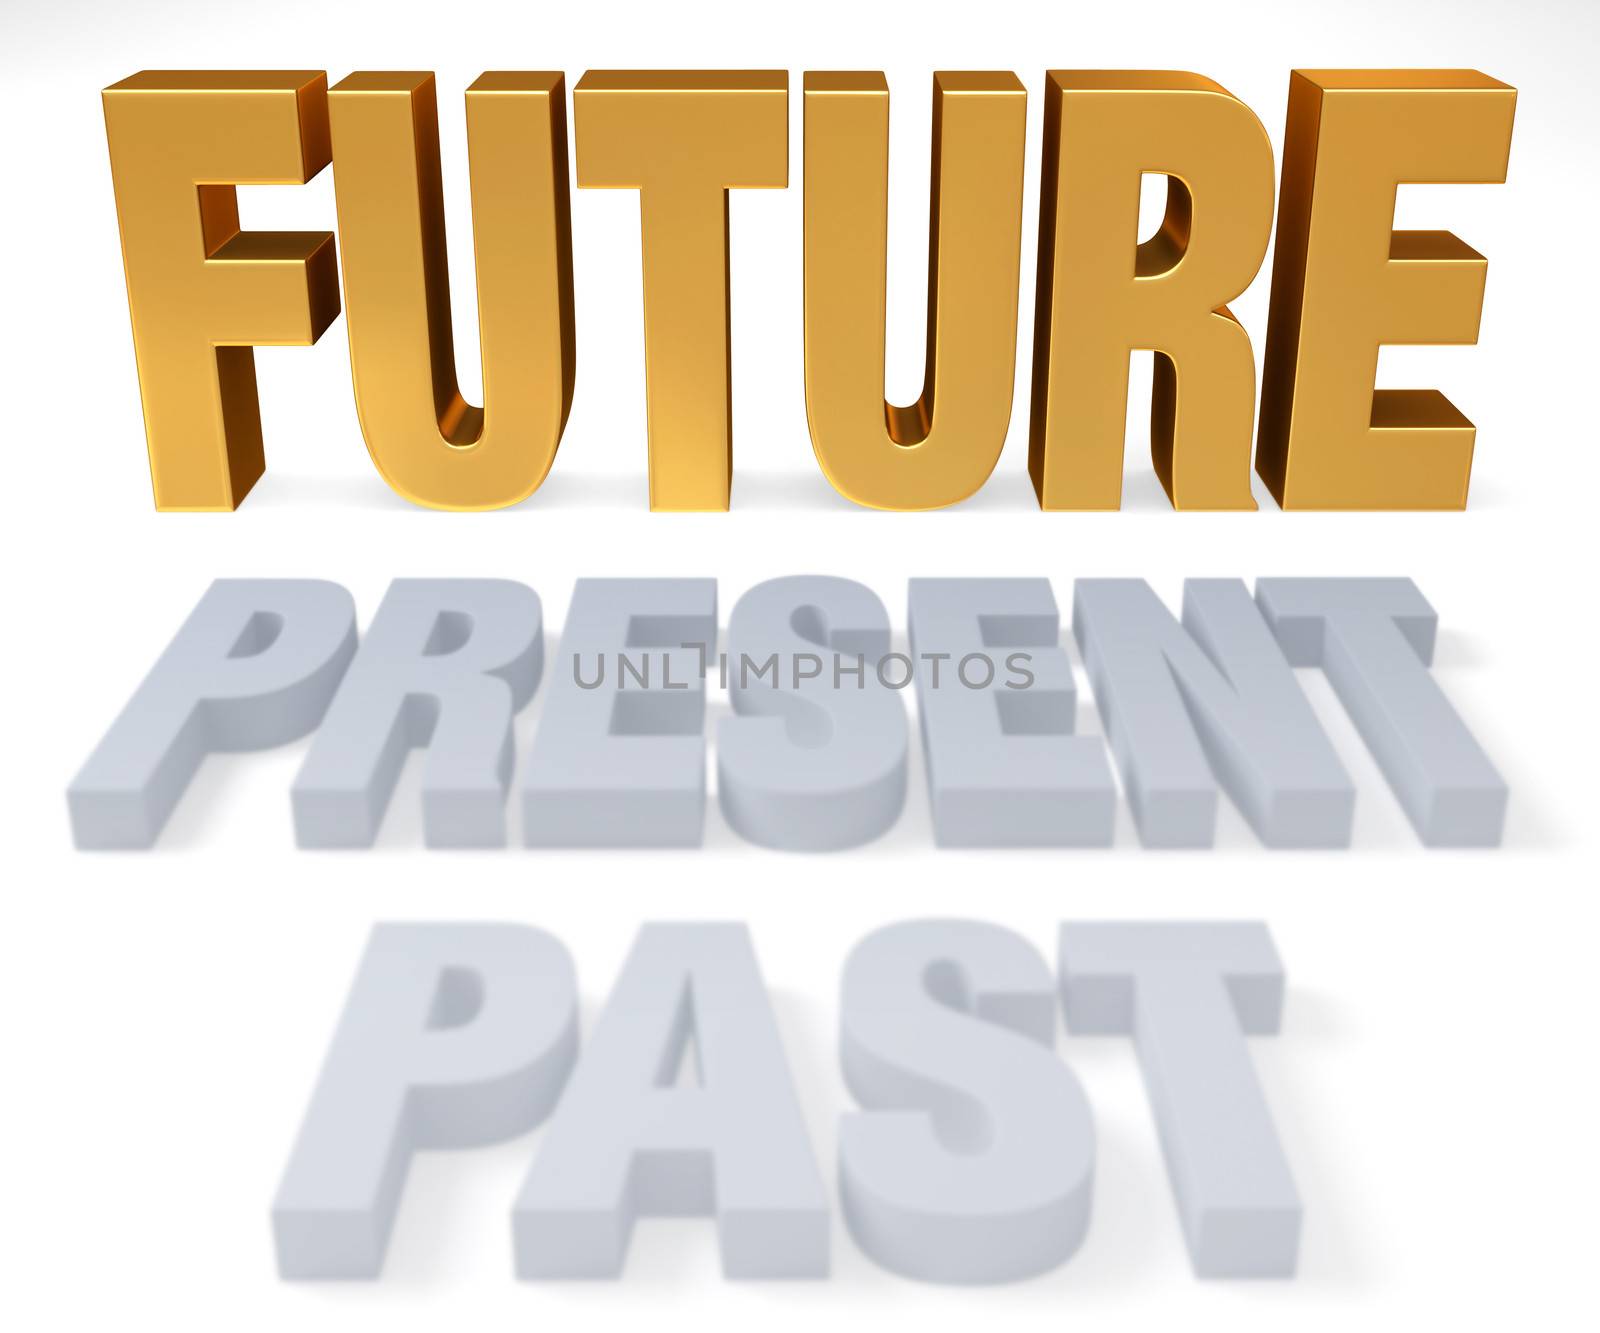 Plain gray "PAST" and "PRESENT lead to a bright, gold "FUTURE".  Focus is on "FUTURE". Isolated on white.